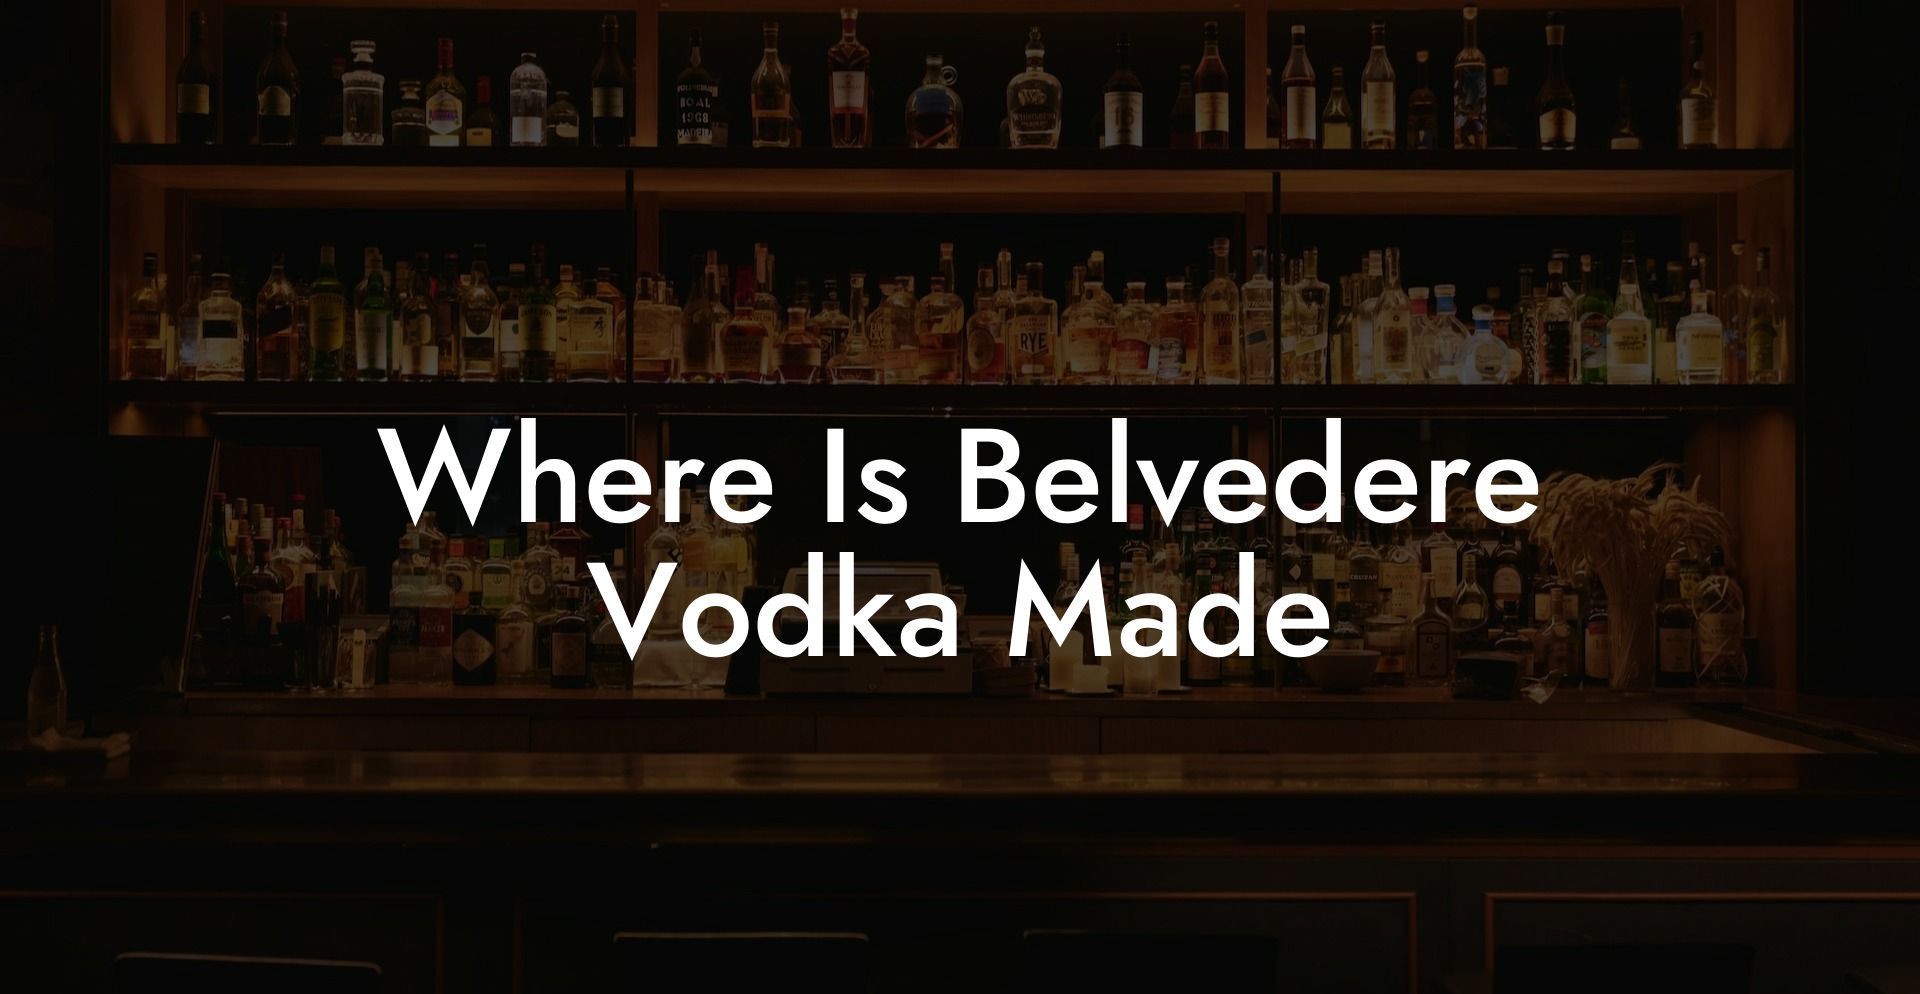 Where Is Belvedere Vodka Made